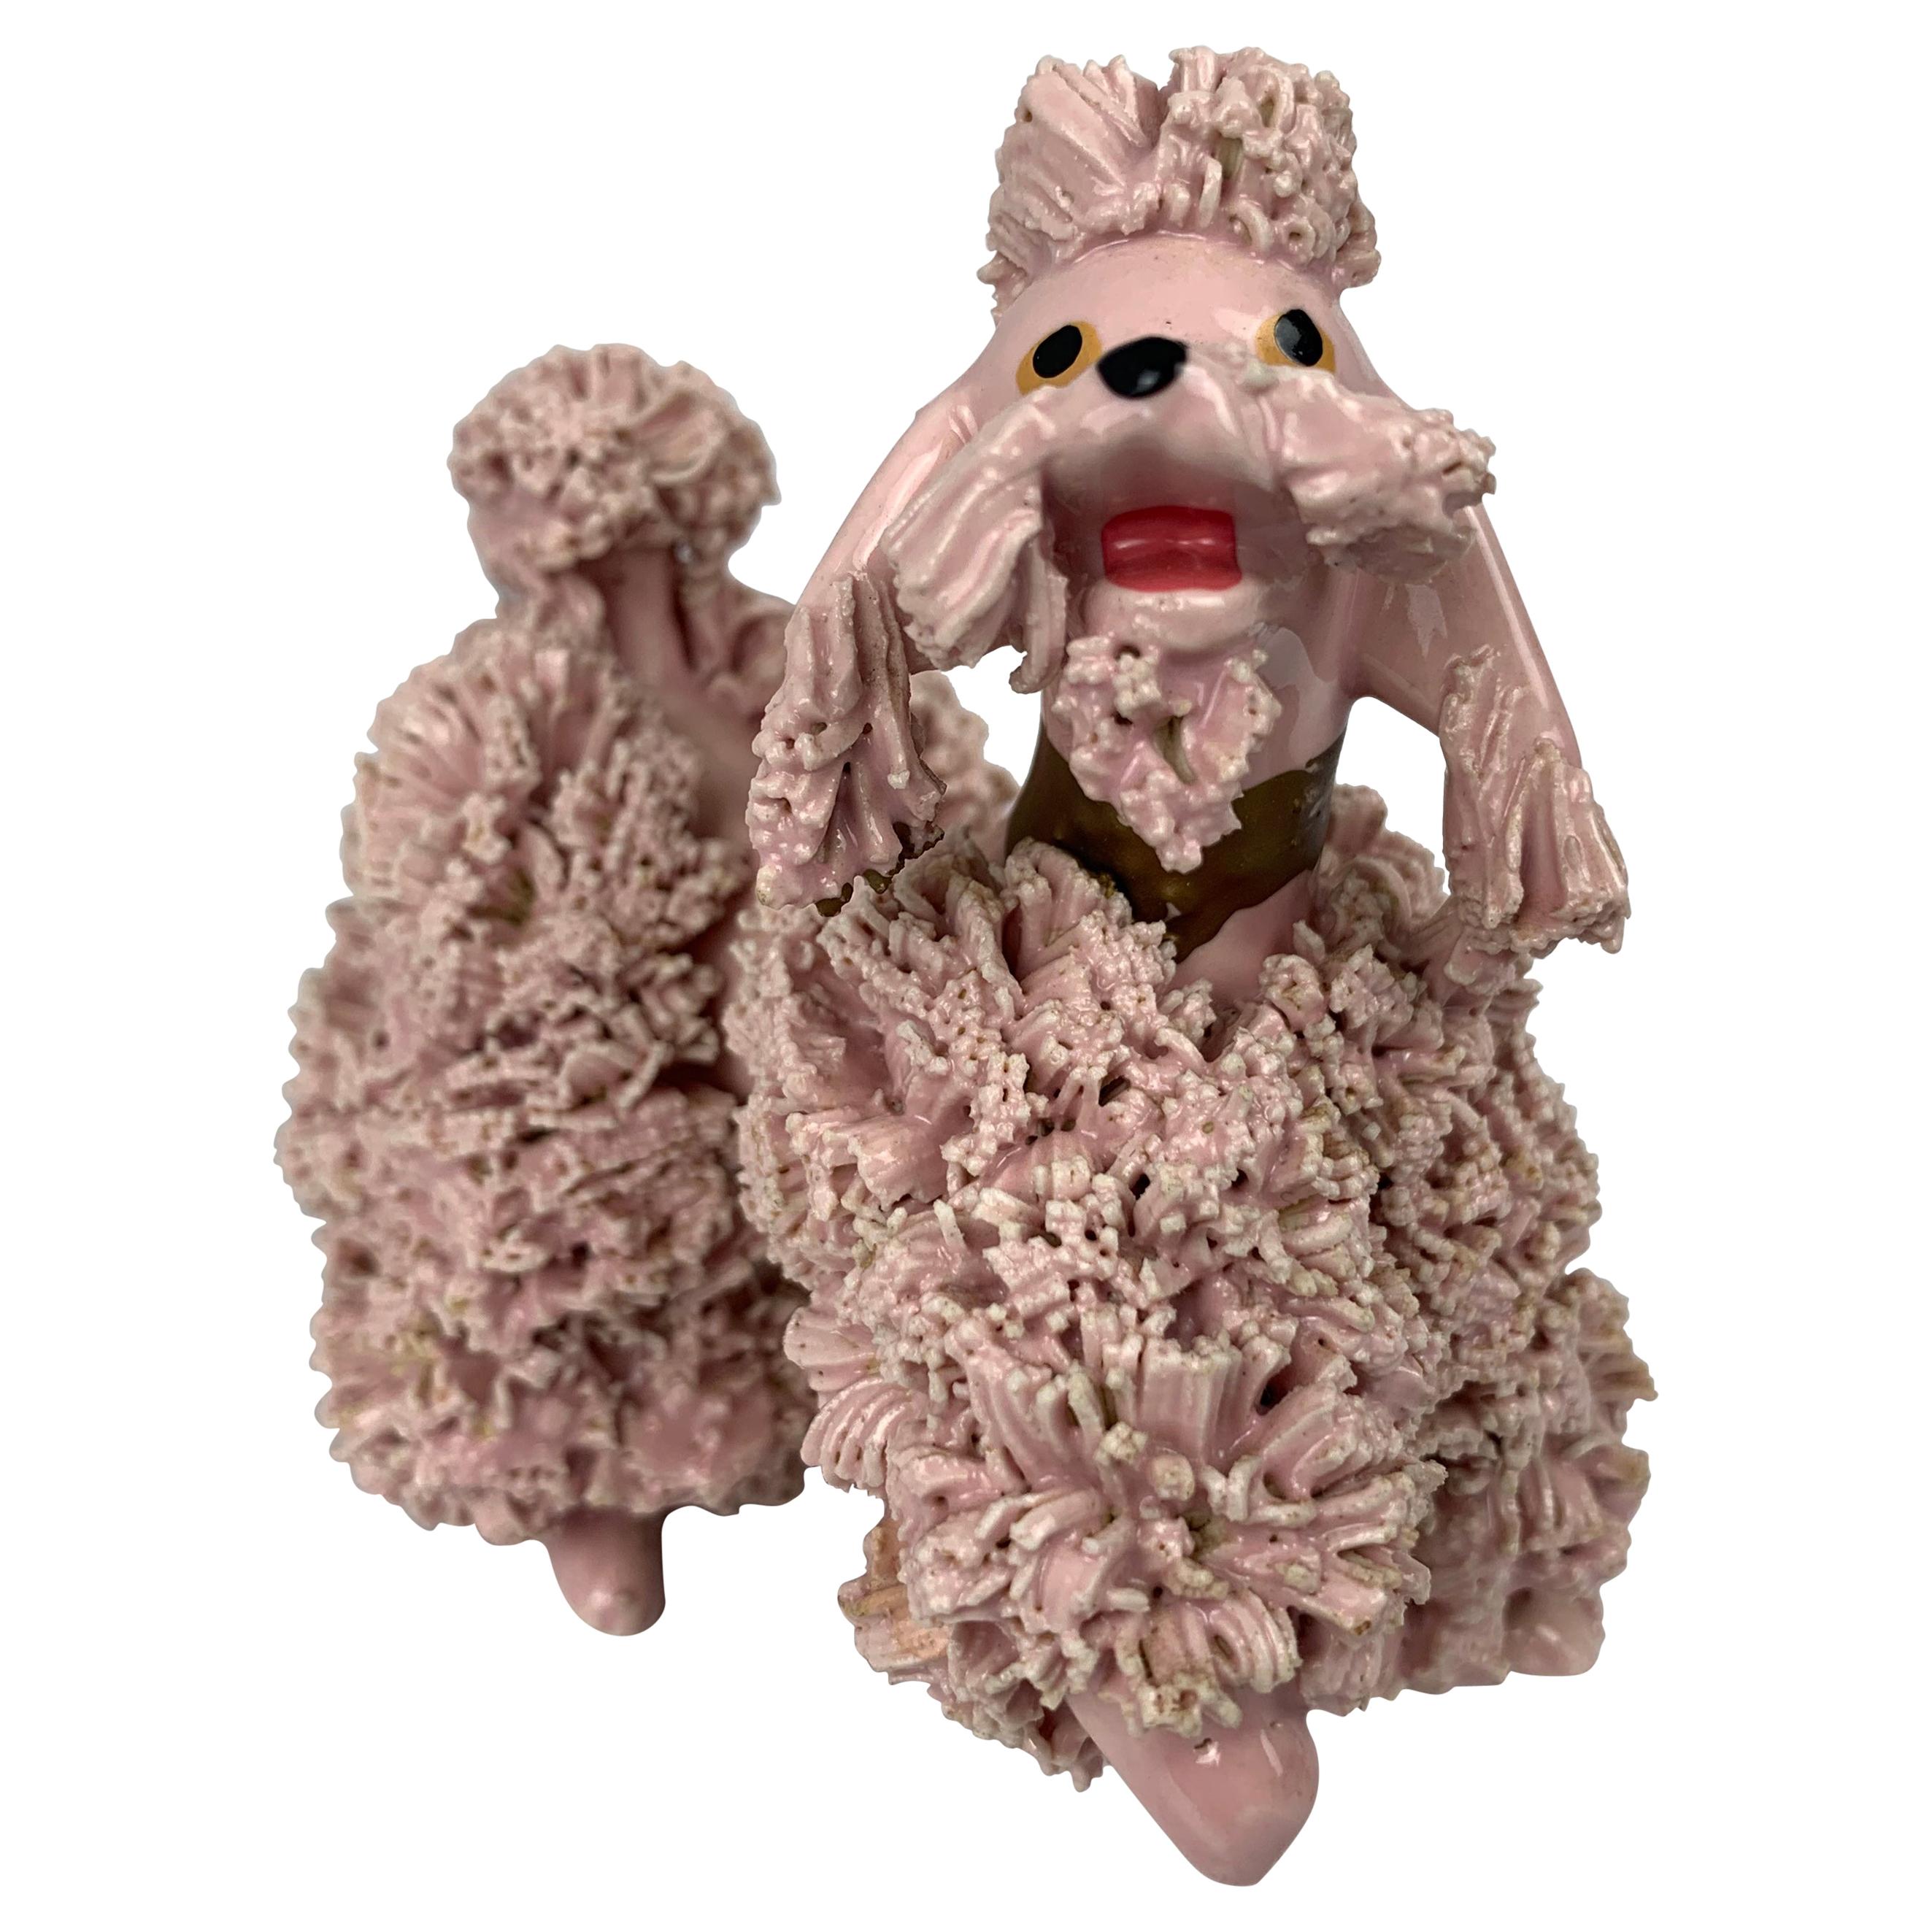  The Iconic Symbol of the 1950"s a Vintage Ceramic Pink Poodle